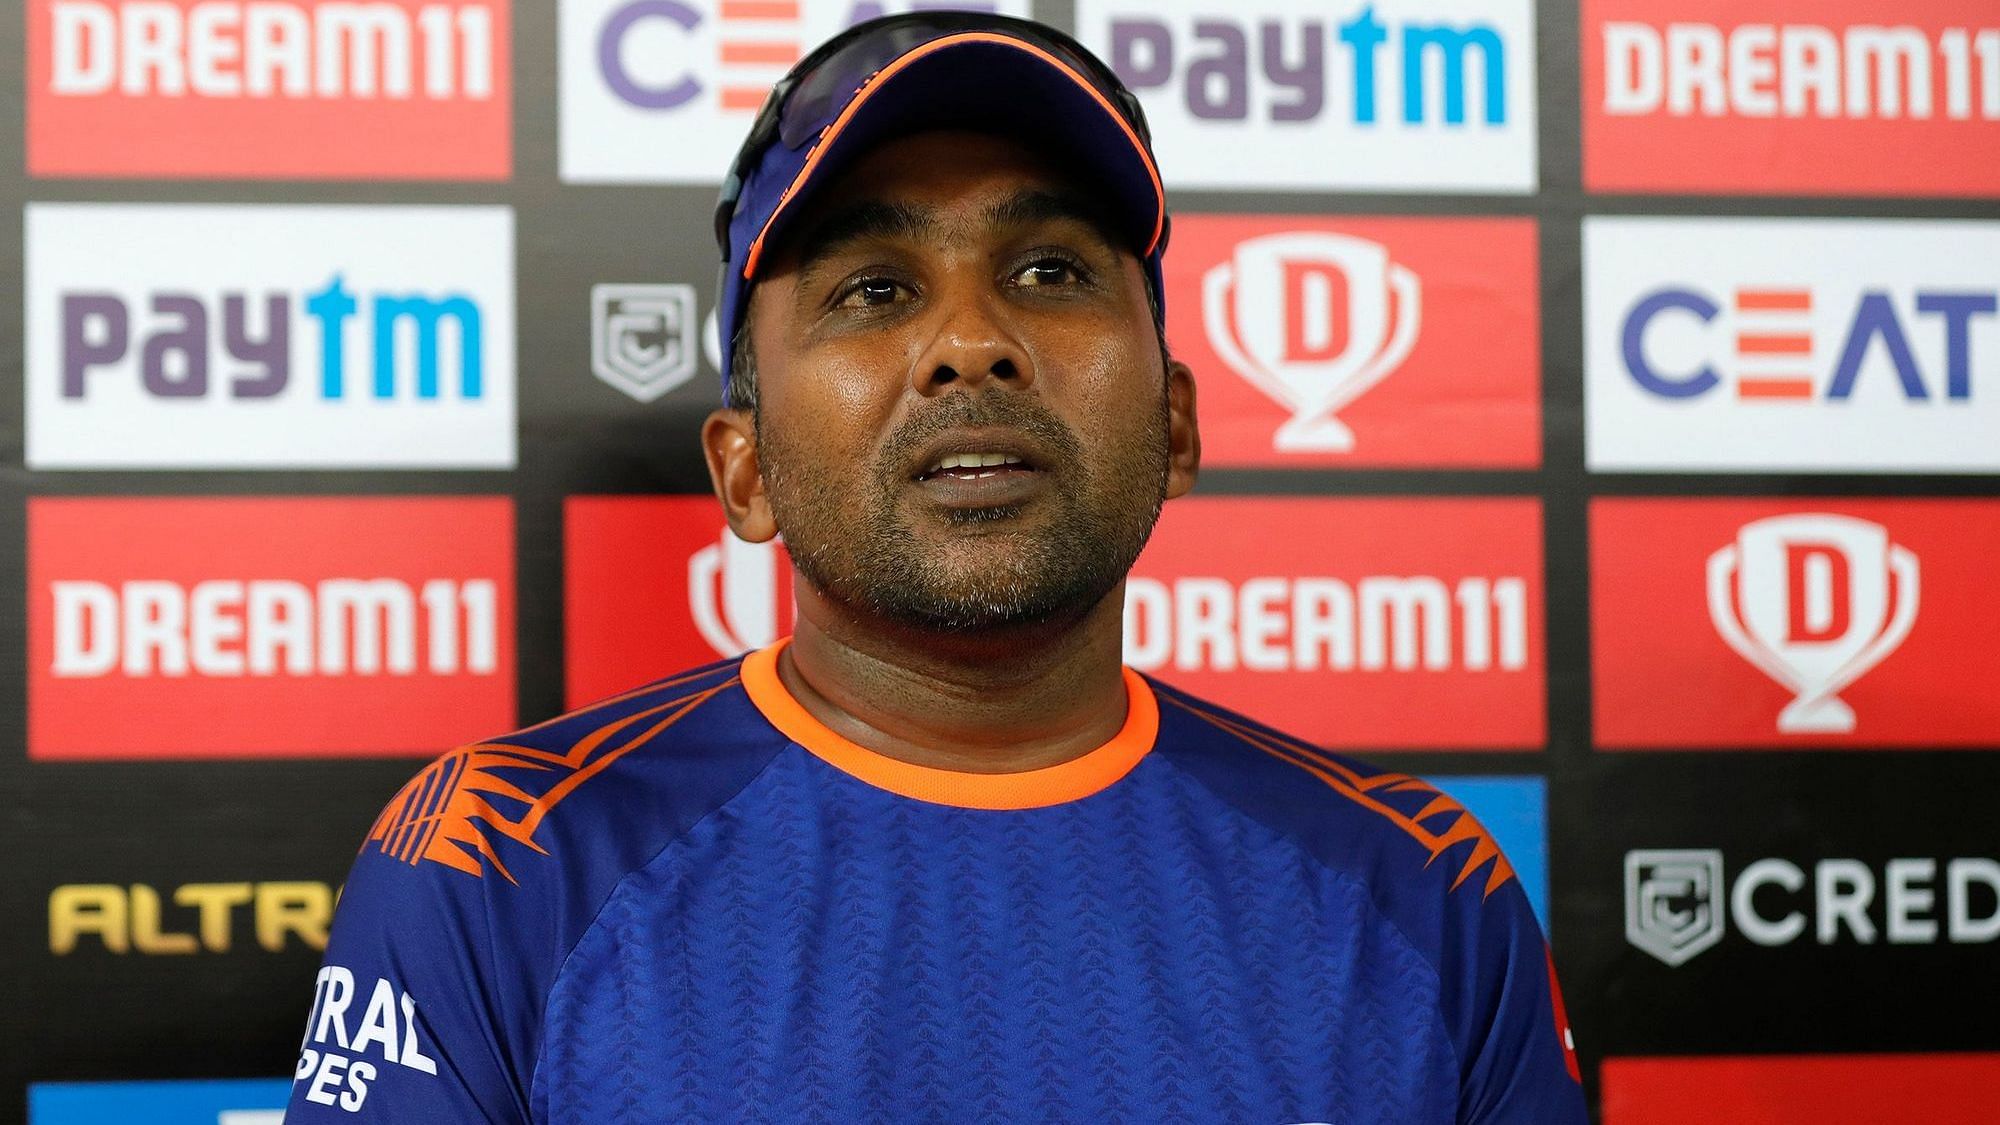 Mumbai Indian’s coach Mahela Jayawardene rued the fact that the bowling from his die wasn’t upto the mark, that led to them chasing 200-plus